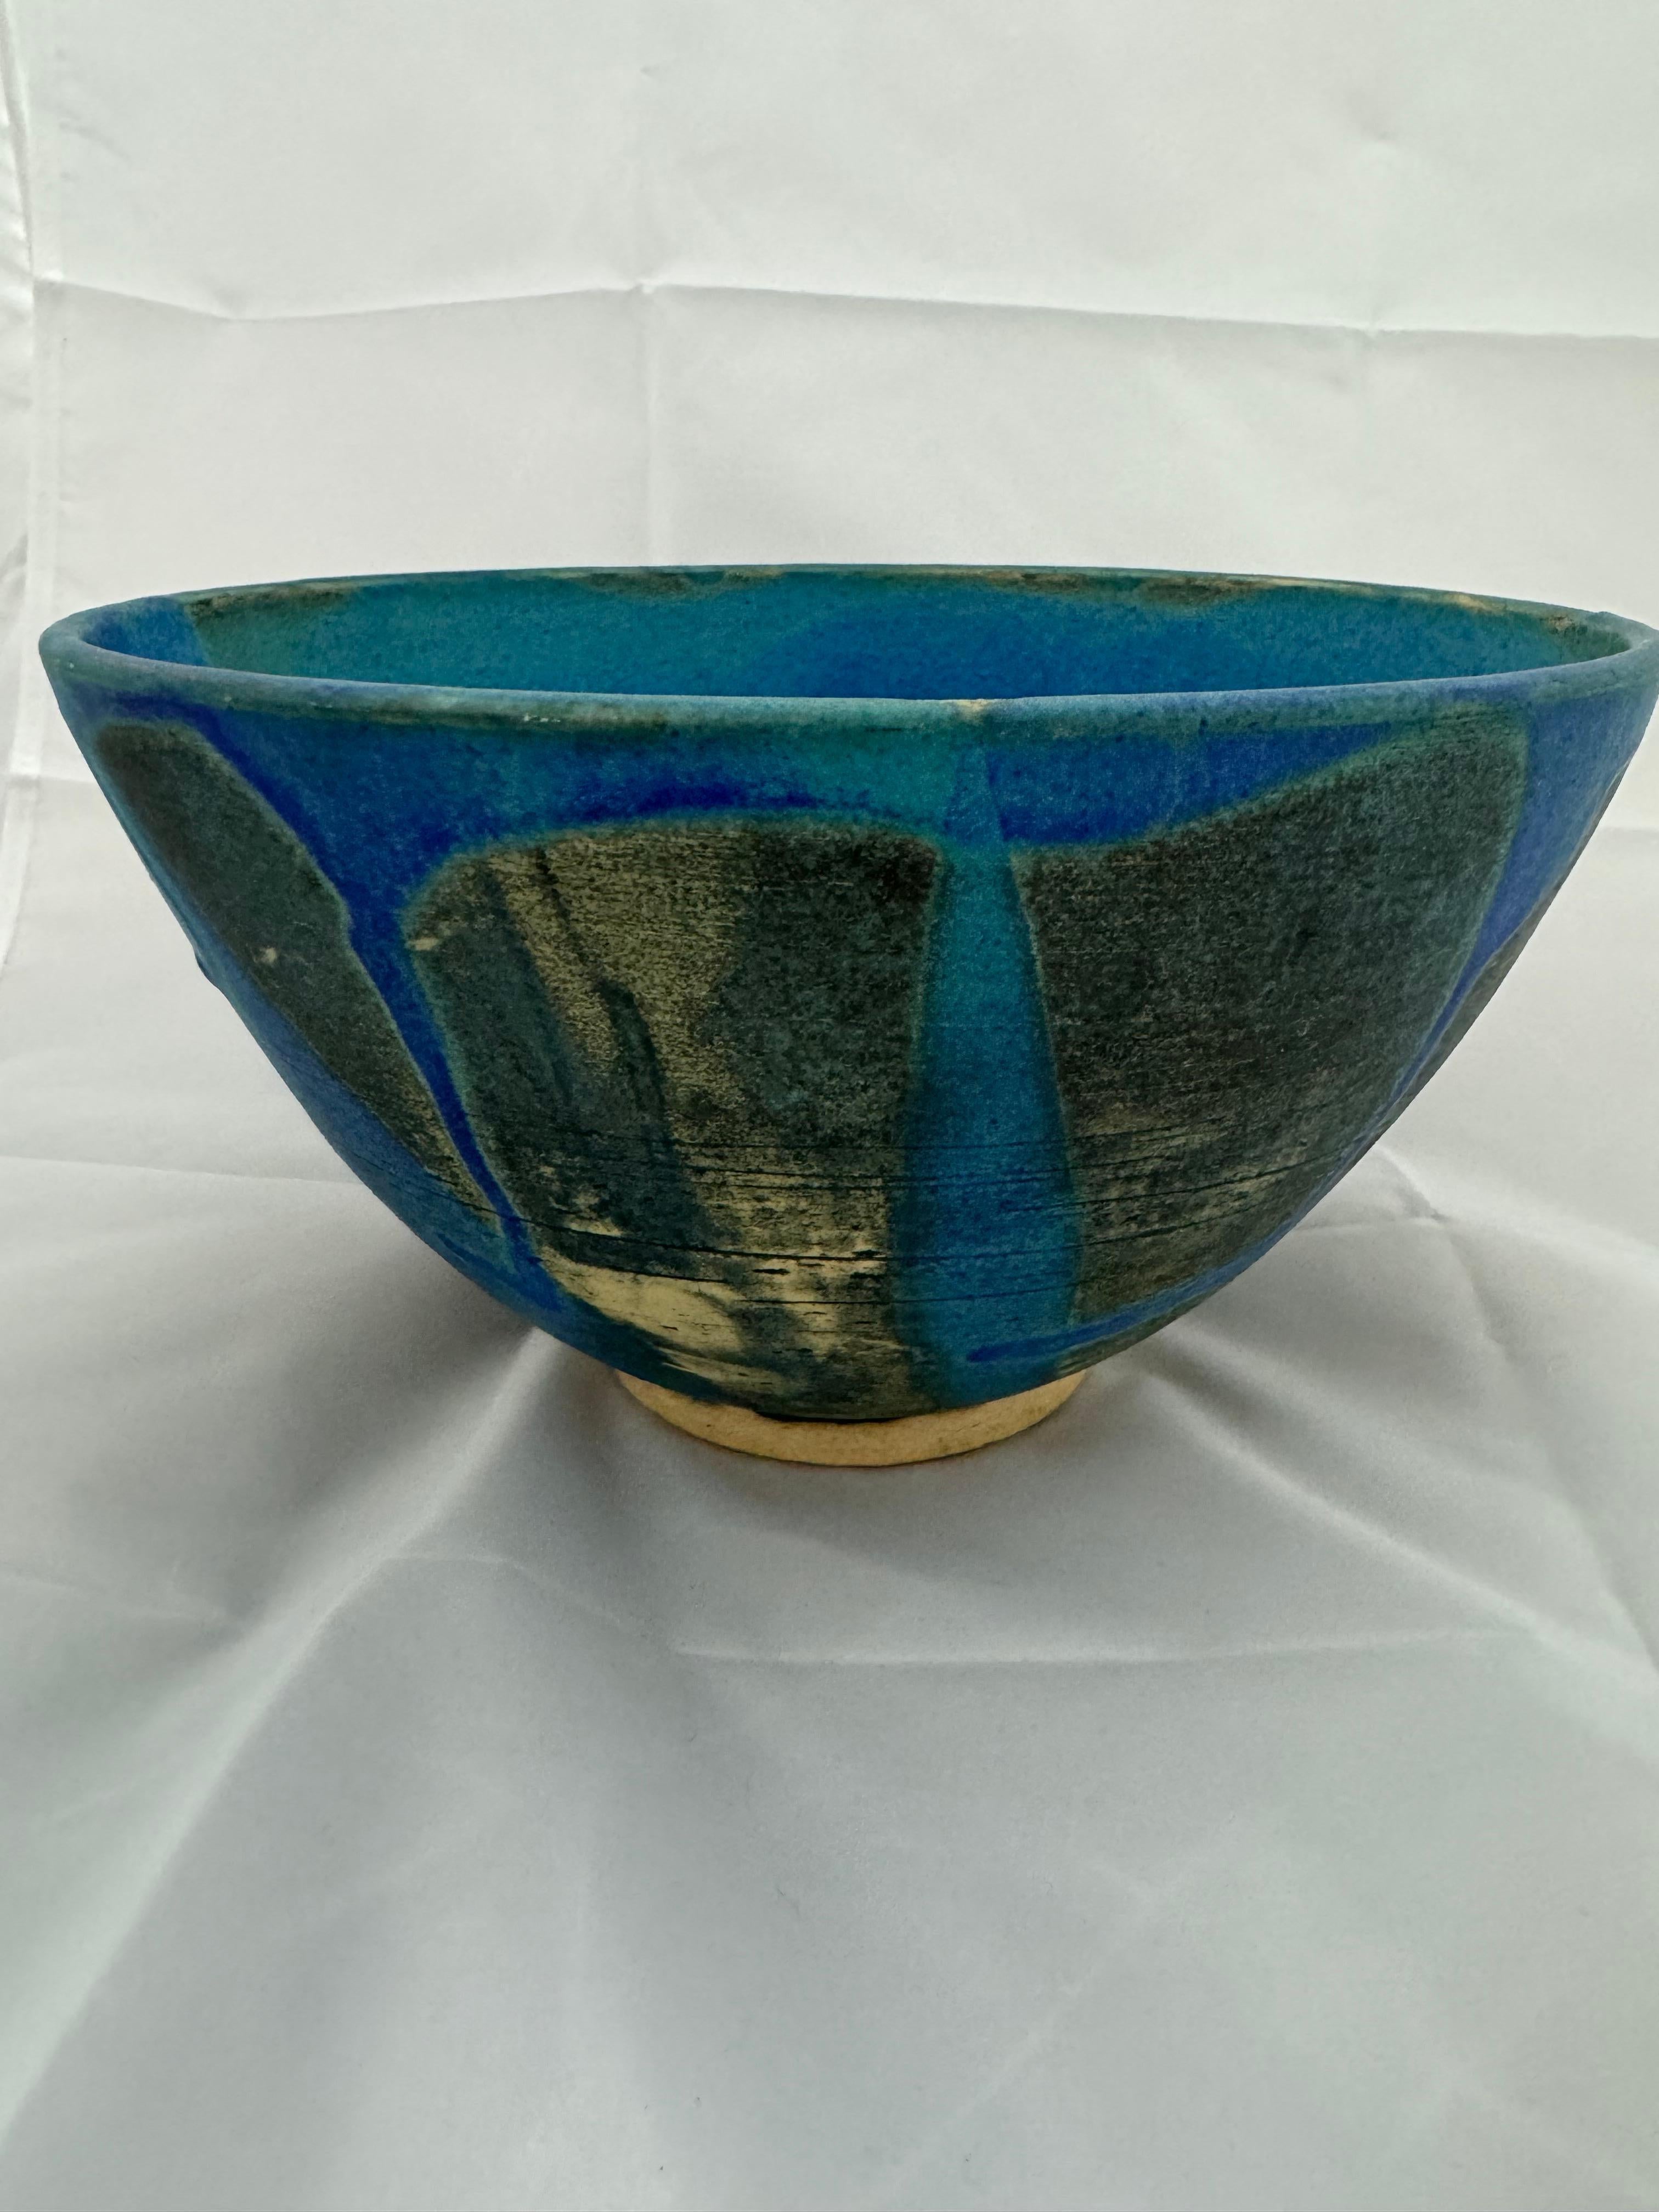 Great Pottery bowl with multiple options for use. 